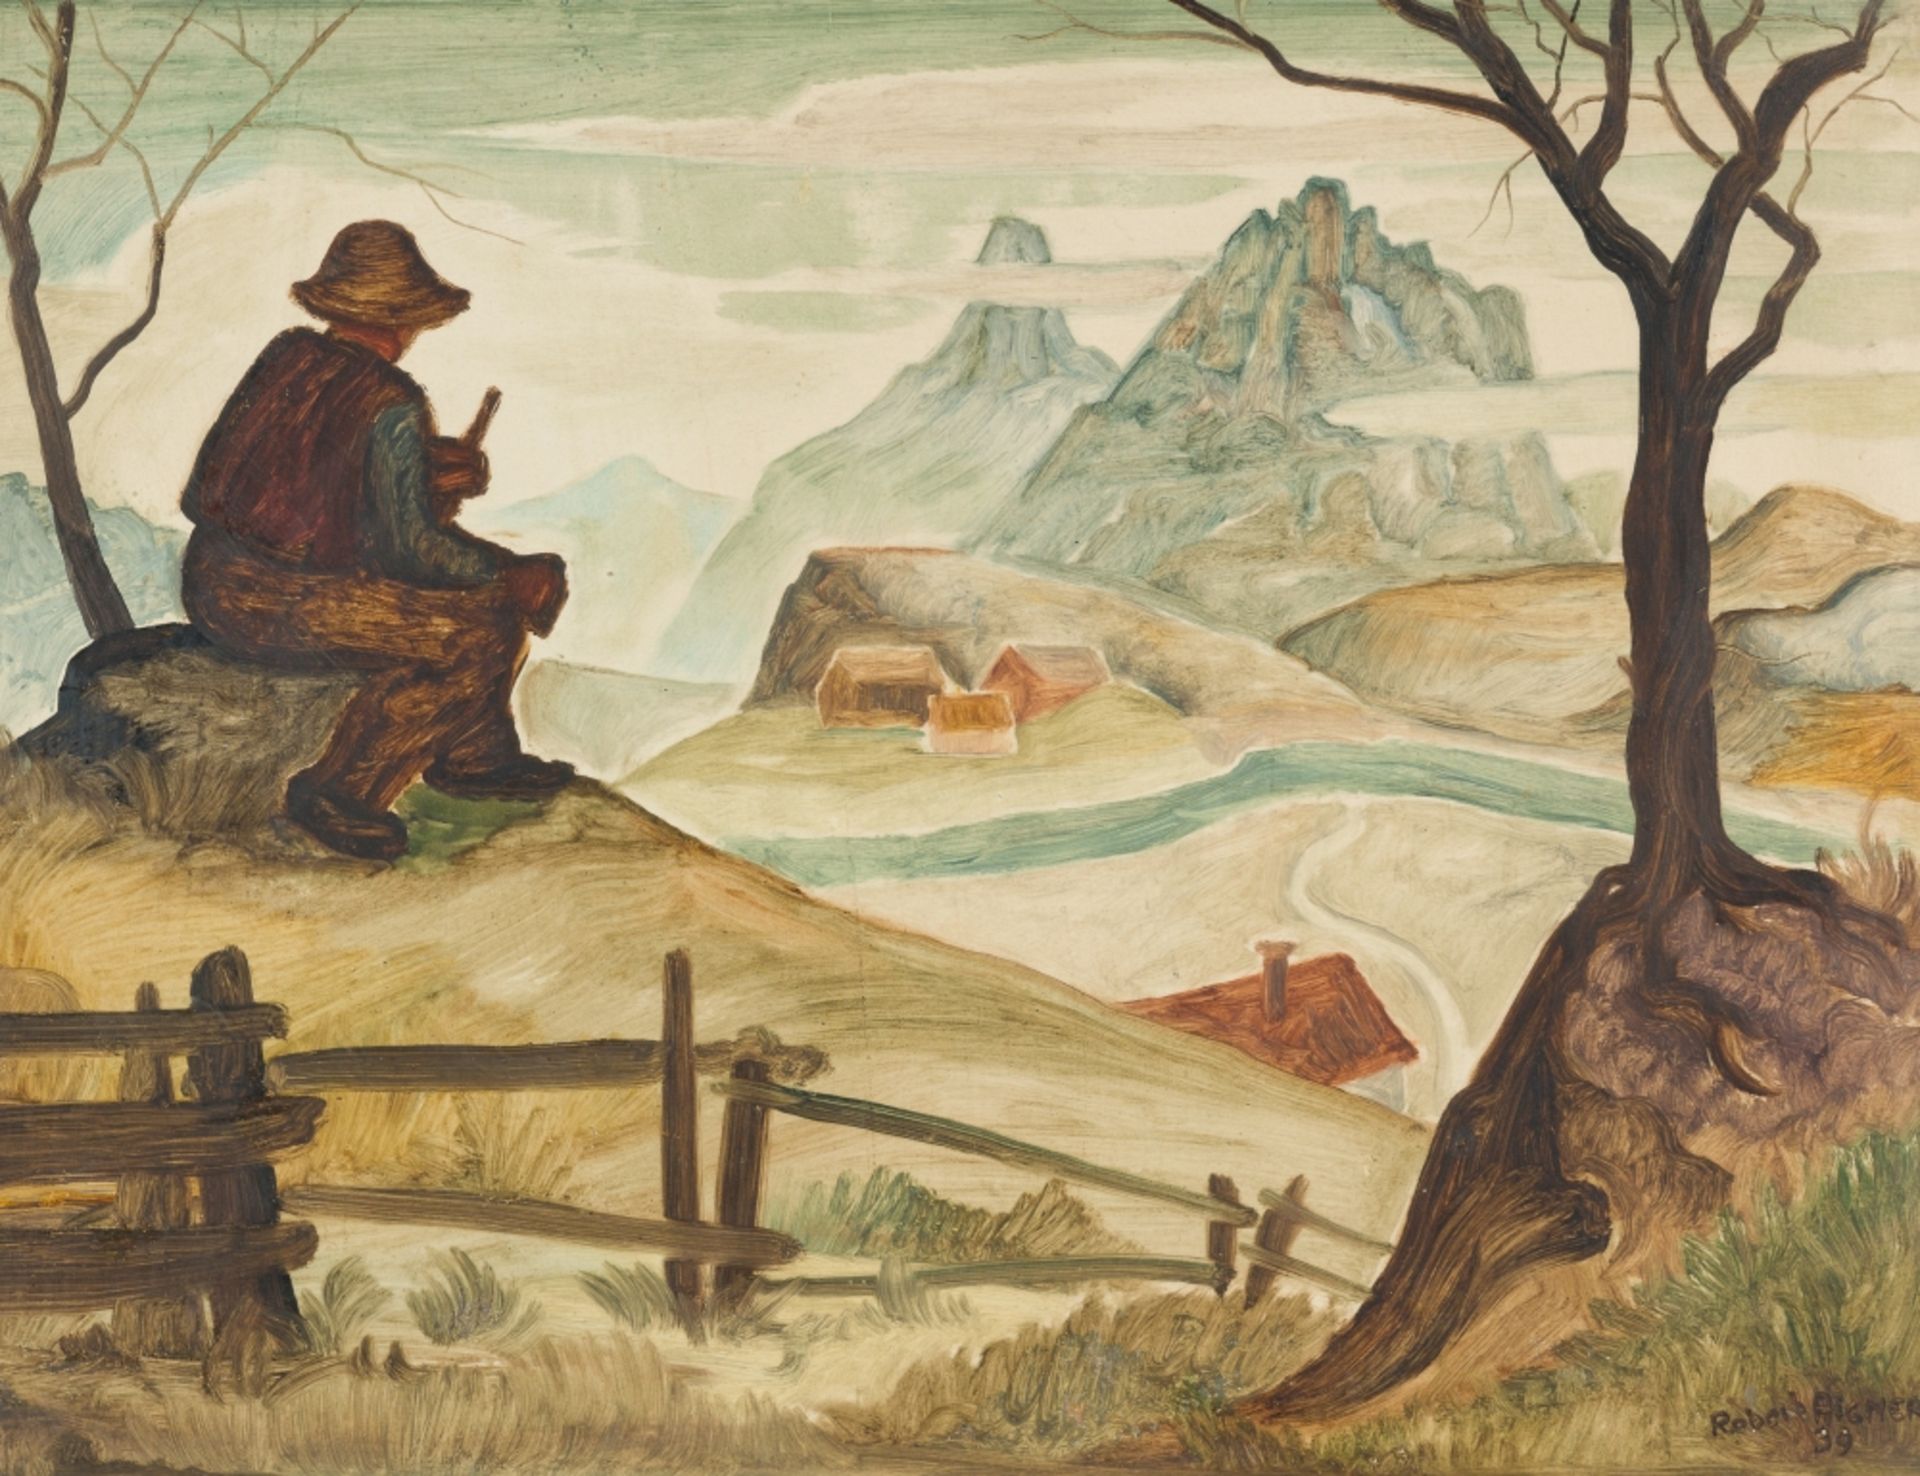 Aigner, Robert(1901 - 1966)Farmer at rest, 19(39)Oil on PaperSigned and dated lower right15,7 x 20,6